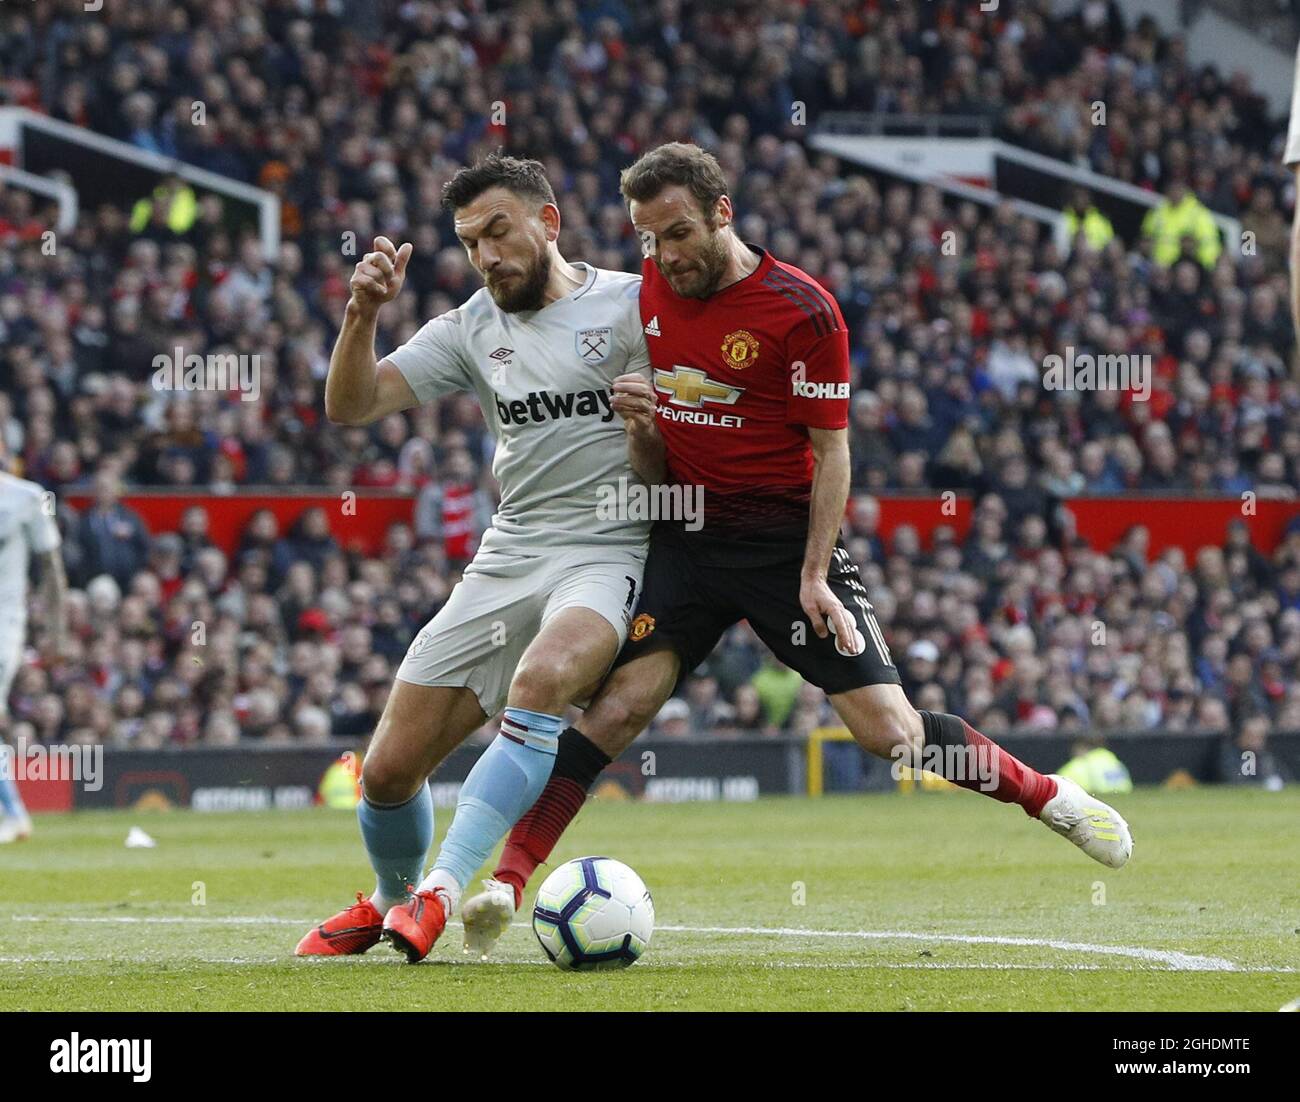 Robert Snodgrass of West Ham United challenges Juan Mata of Manchester United and Mata is awarded a penalty  during the Premier League match at Old Trafford, Manchester. Picture date: 13th April 2019. Picture credit should read: Darren Staples/Sportimage via PA Images Stock Photo